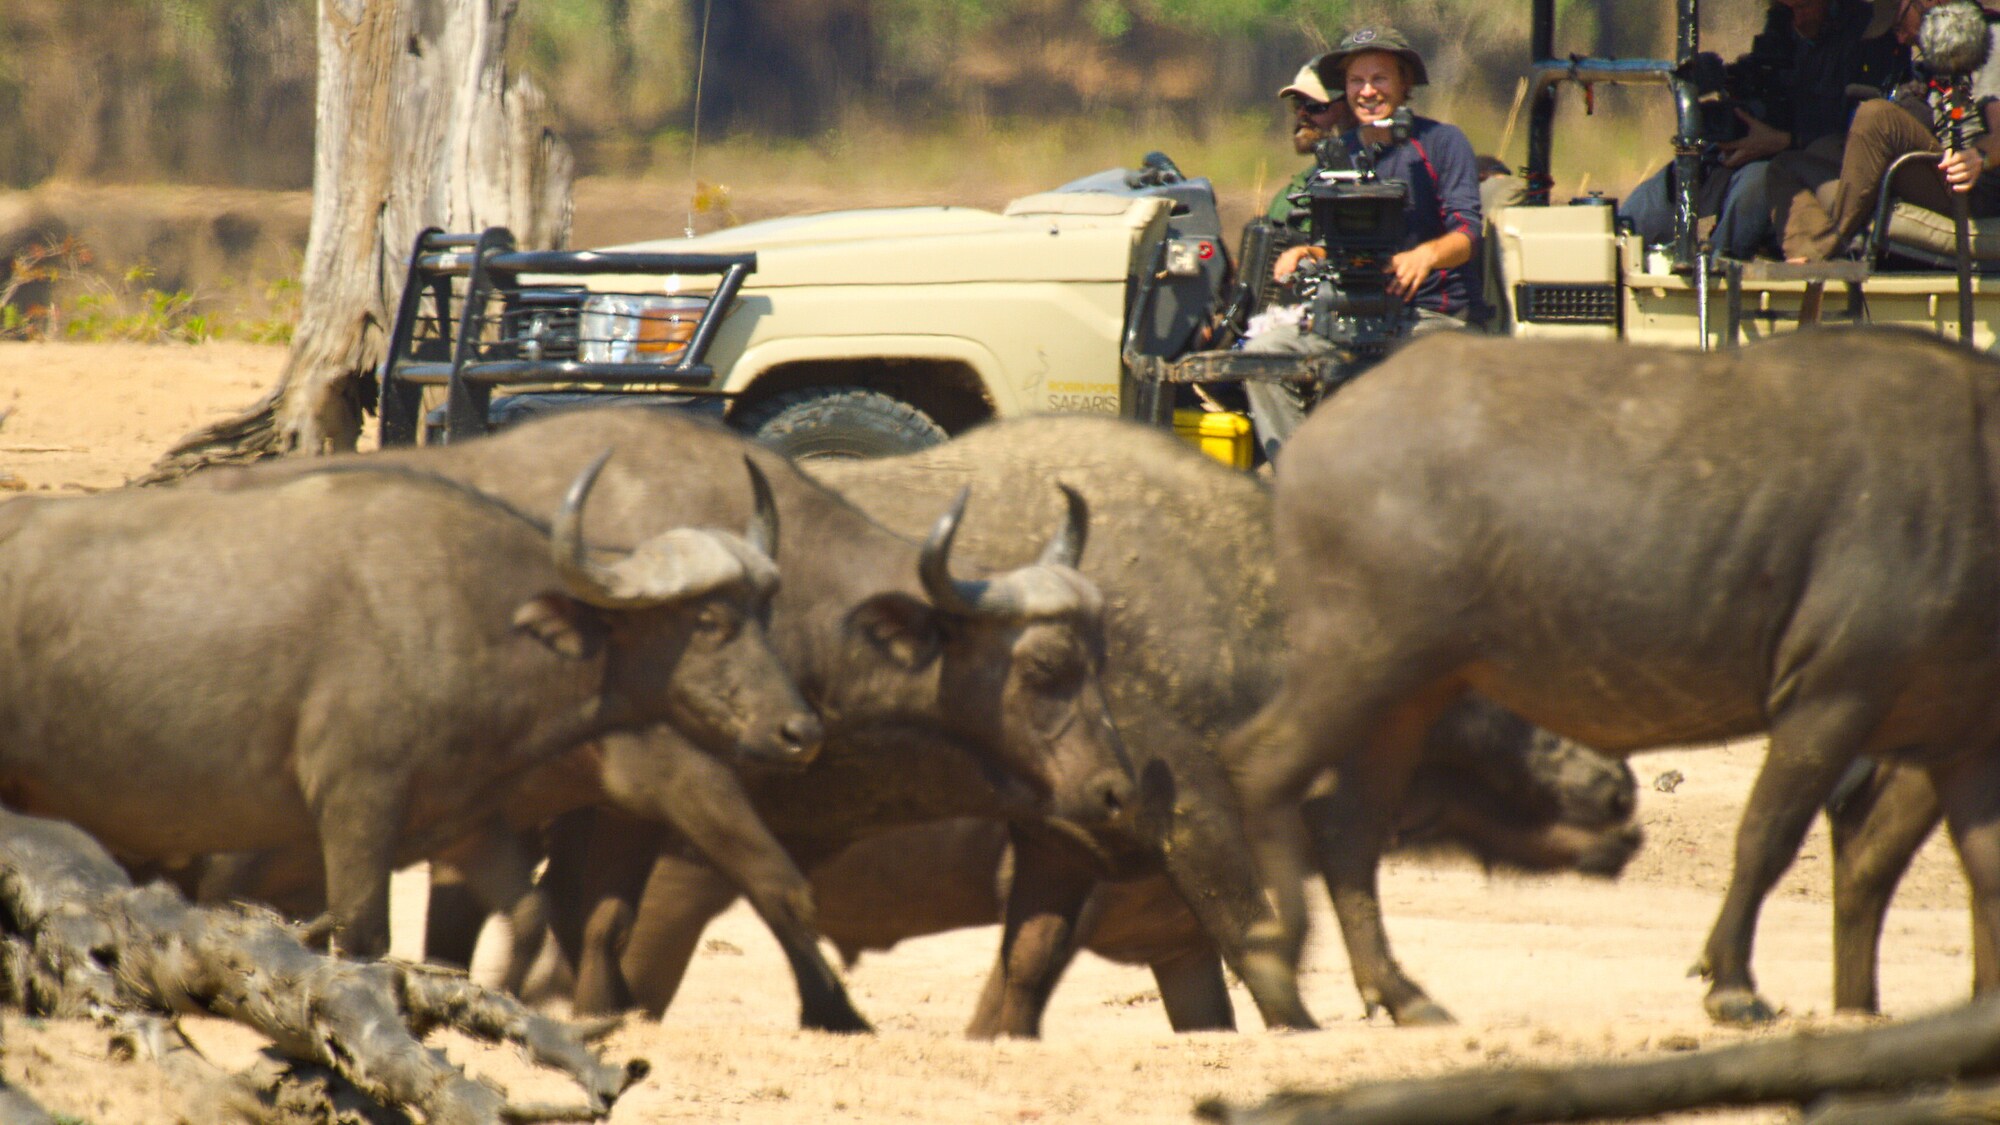 A herd of buffalo walk past the film crew. (Credit: National Geographic/Sam Stewart for Disney+)